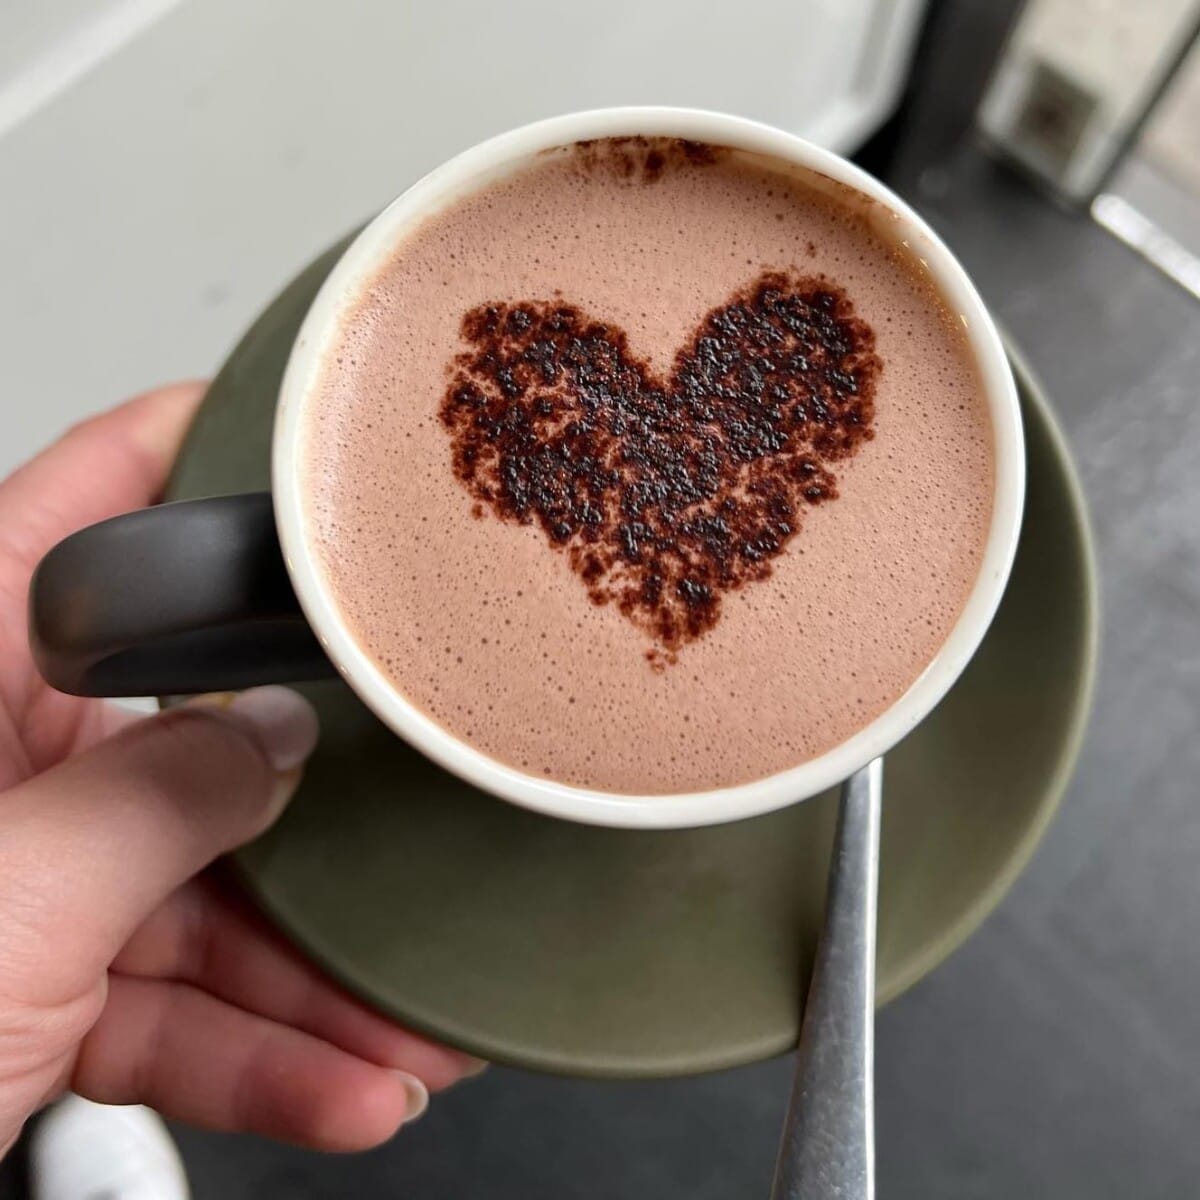 Beautiful coffee art that captures the vibrancy of dog-friendly cafes in Melbourne. It features a heart shape, crafted with love and skill from creamy espresso and fluffy milk foam.